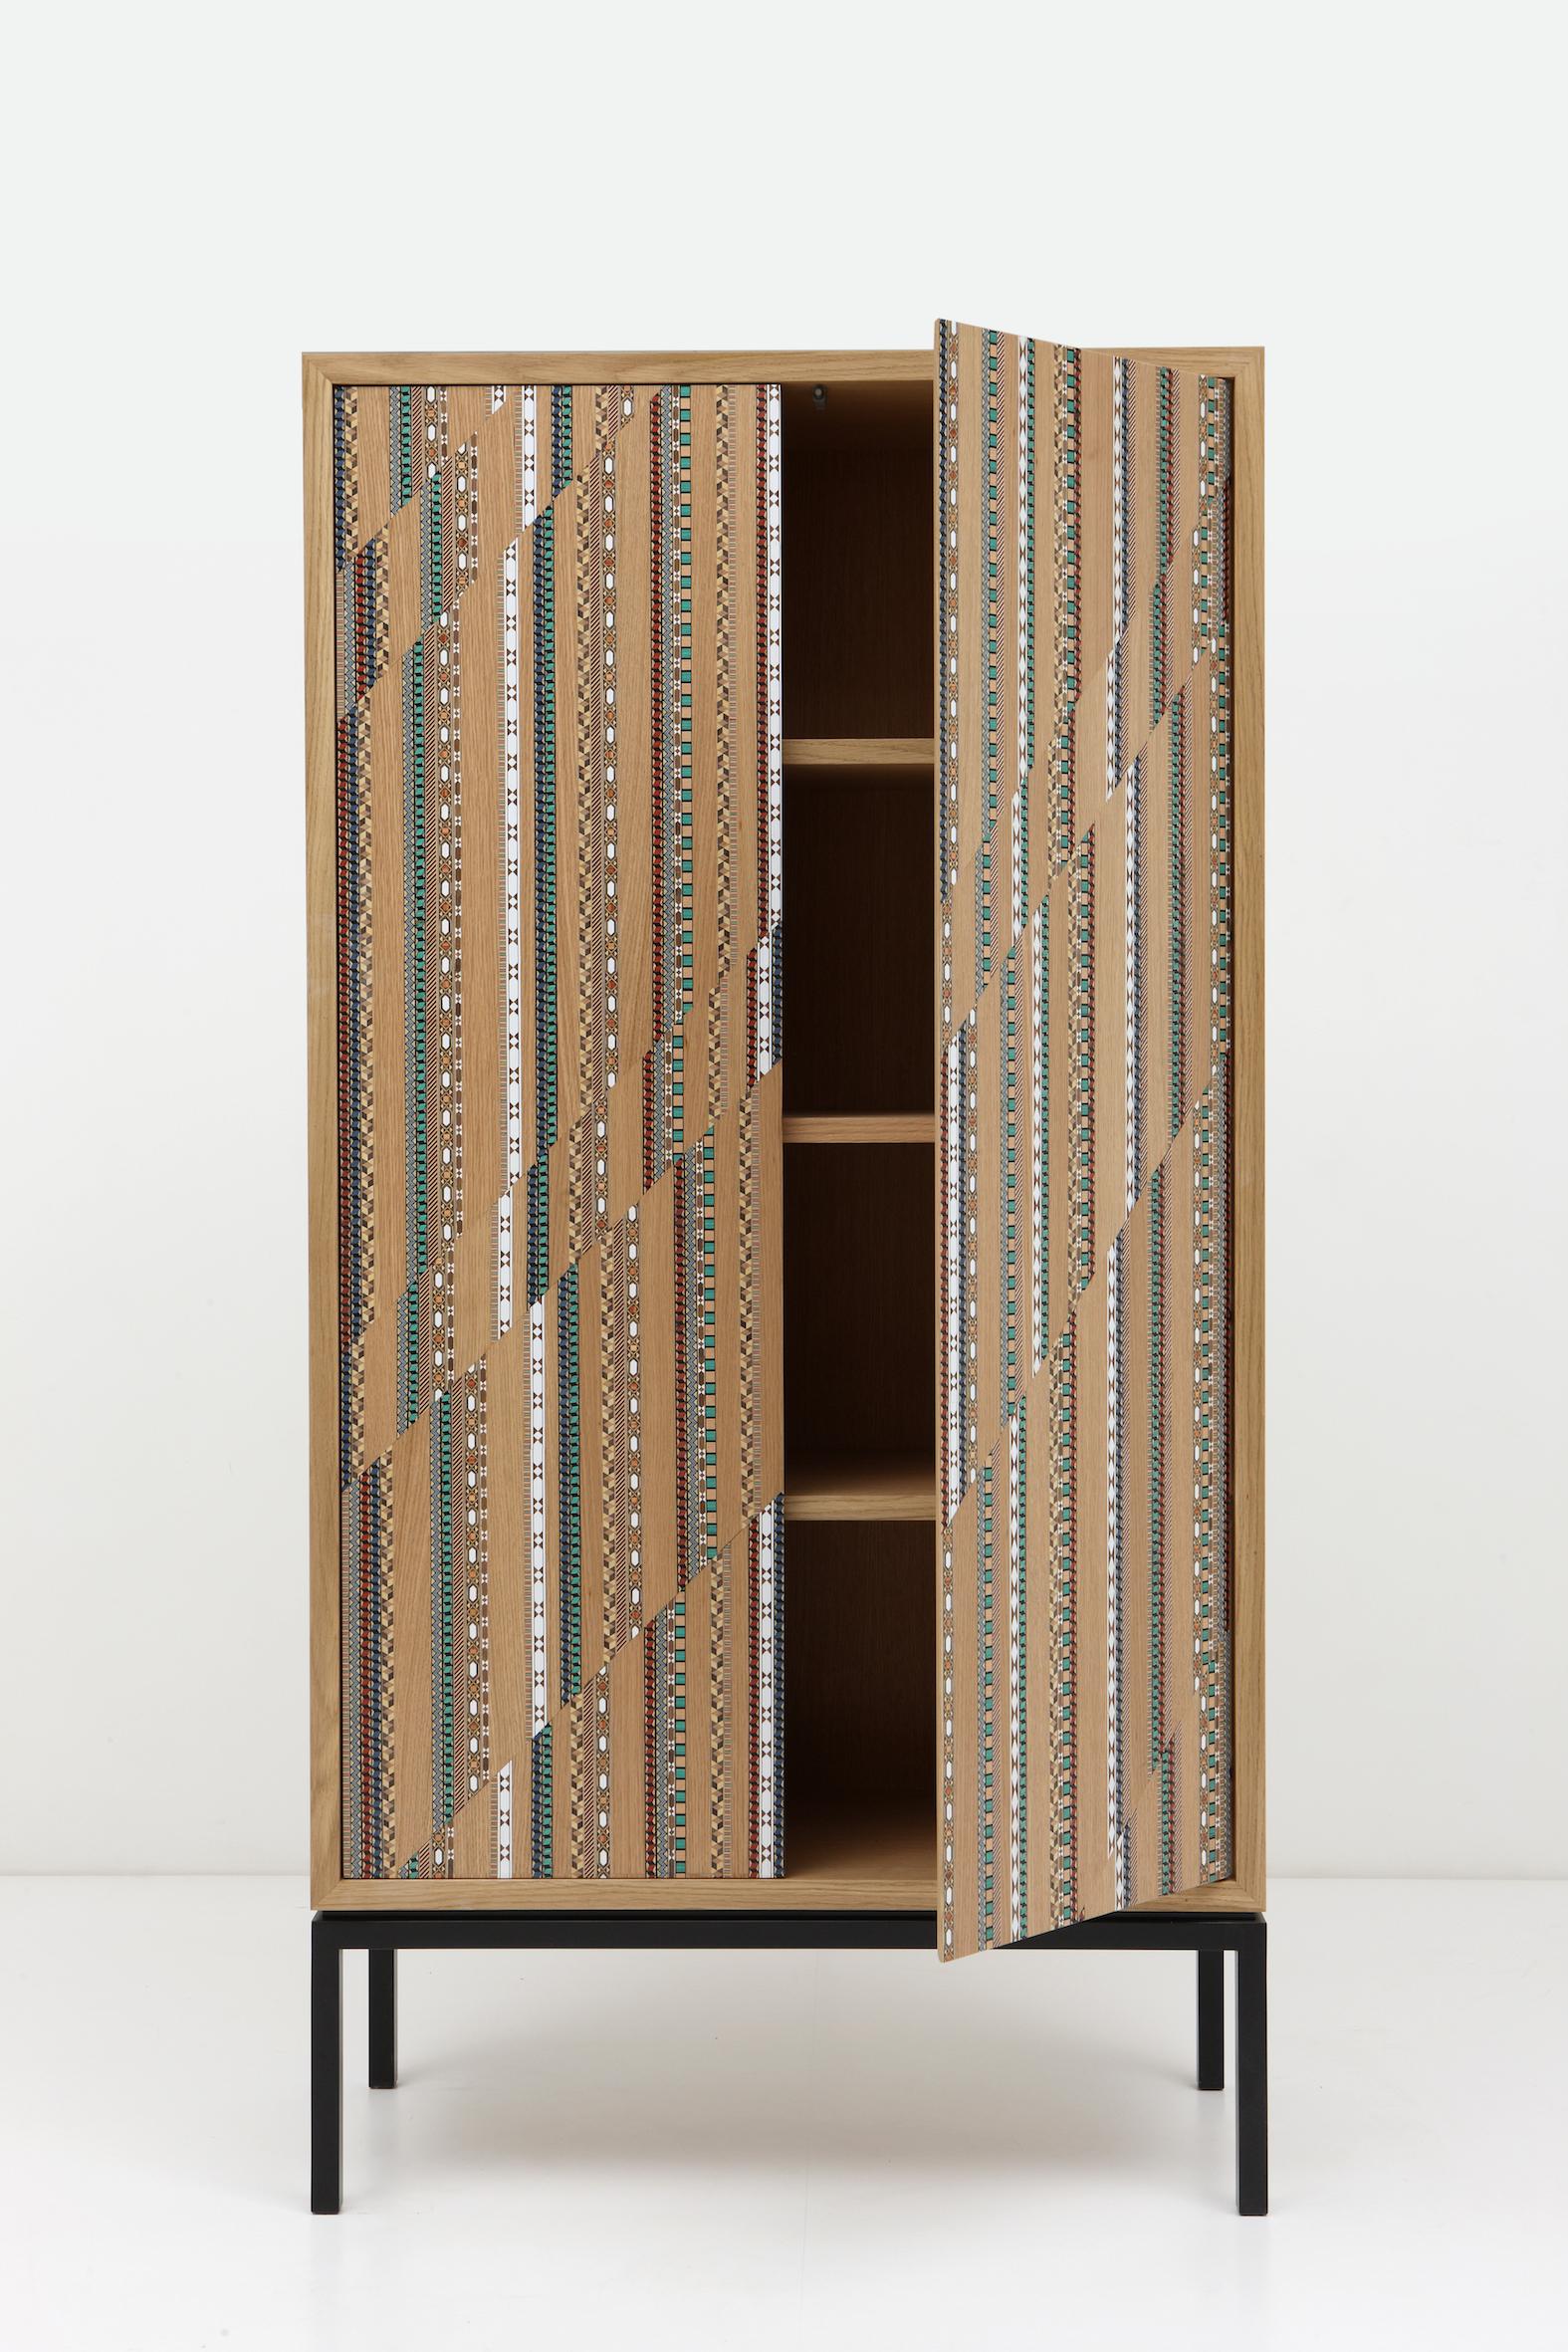 Part of the Funquetry collection, the shift cabinet creates a graphic interpretation of the traditional craft of wood marquetry. By creating a shift, the colorful patterns are accentuated.